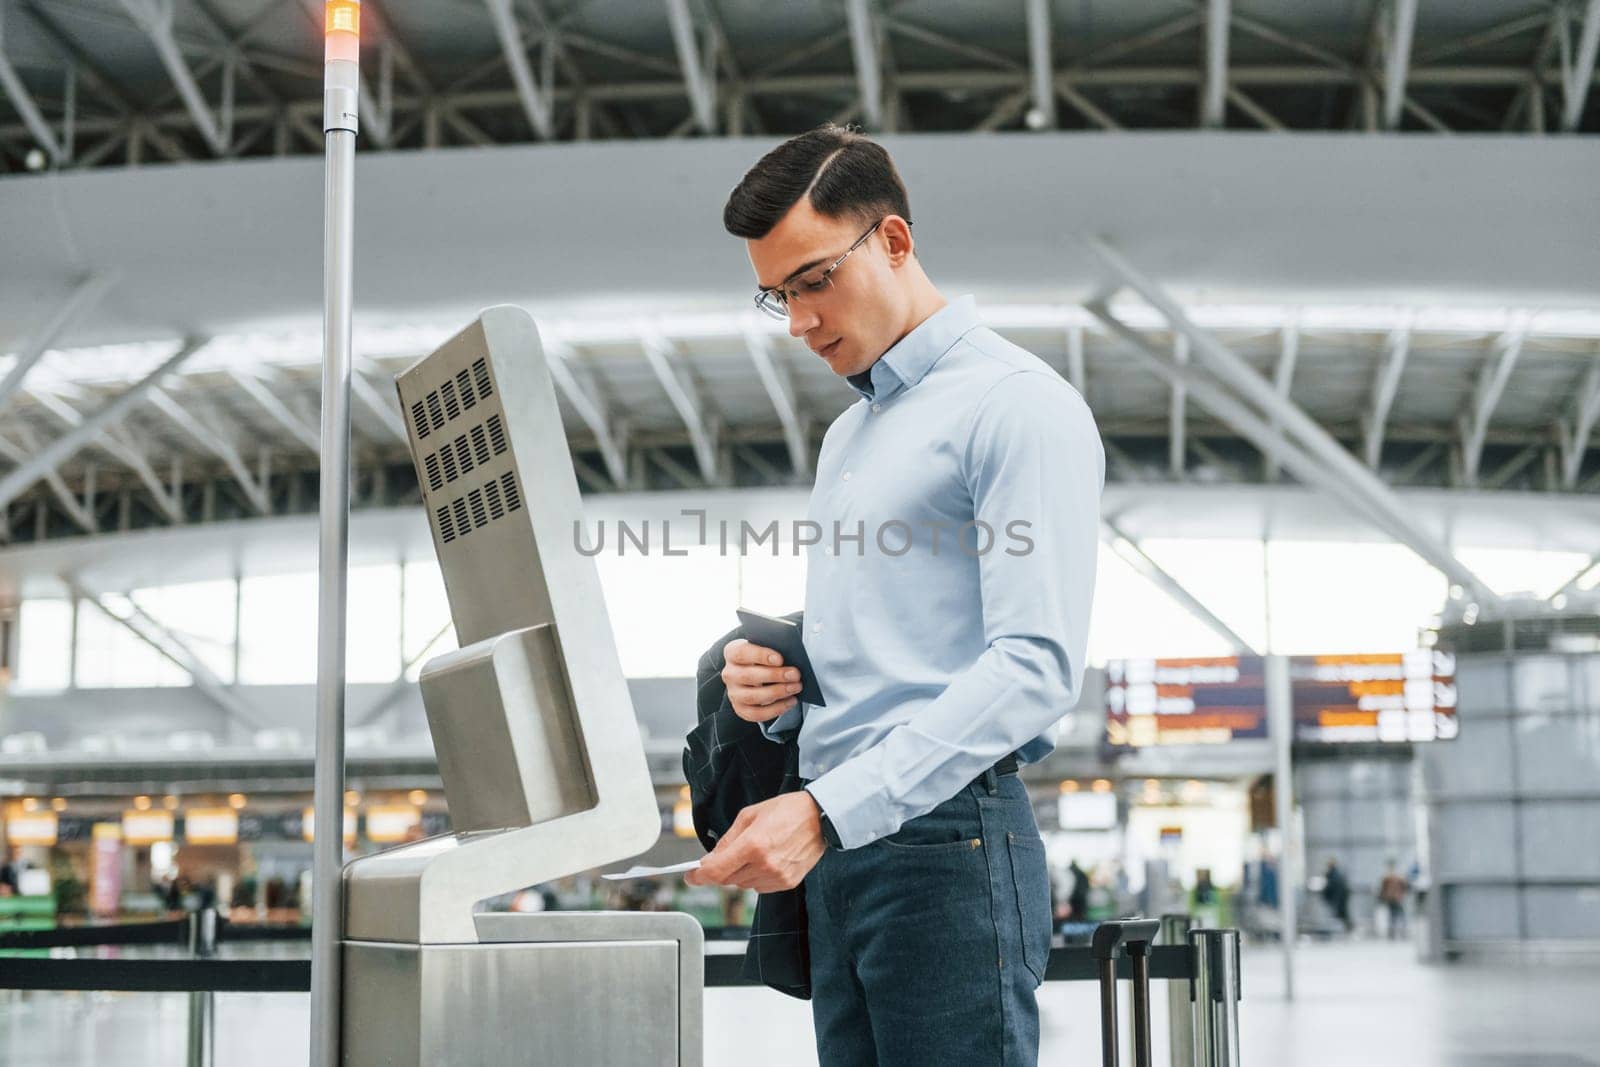 Using terminal. Young businessman in formal clothes is in the airport at daytime.